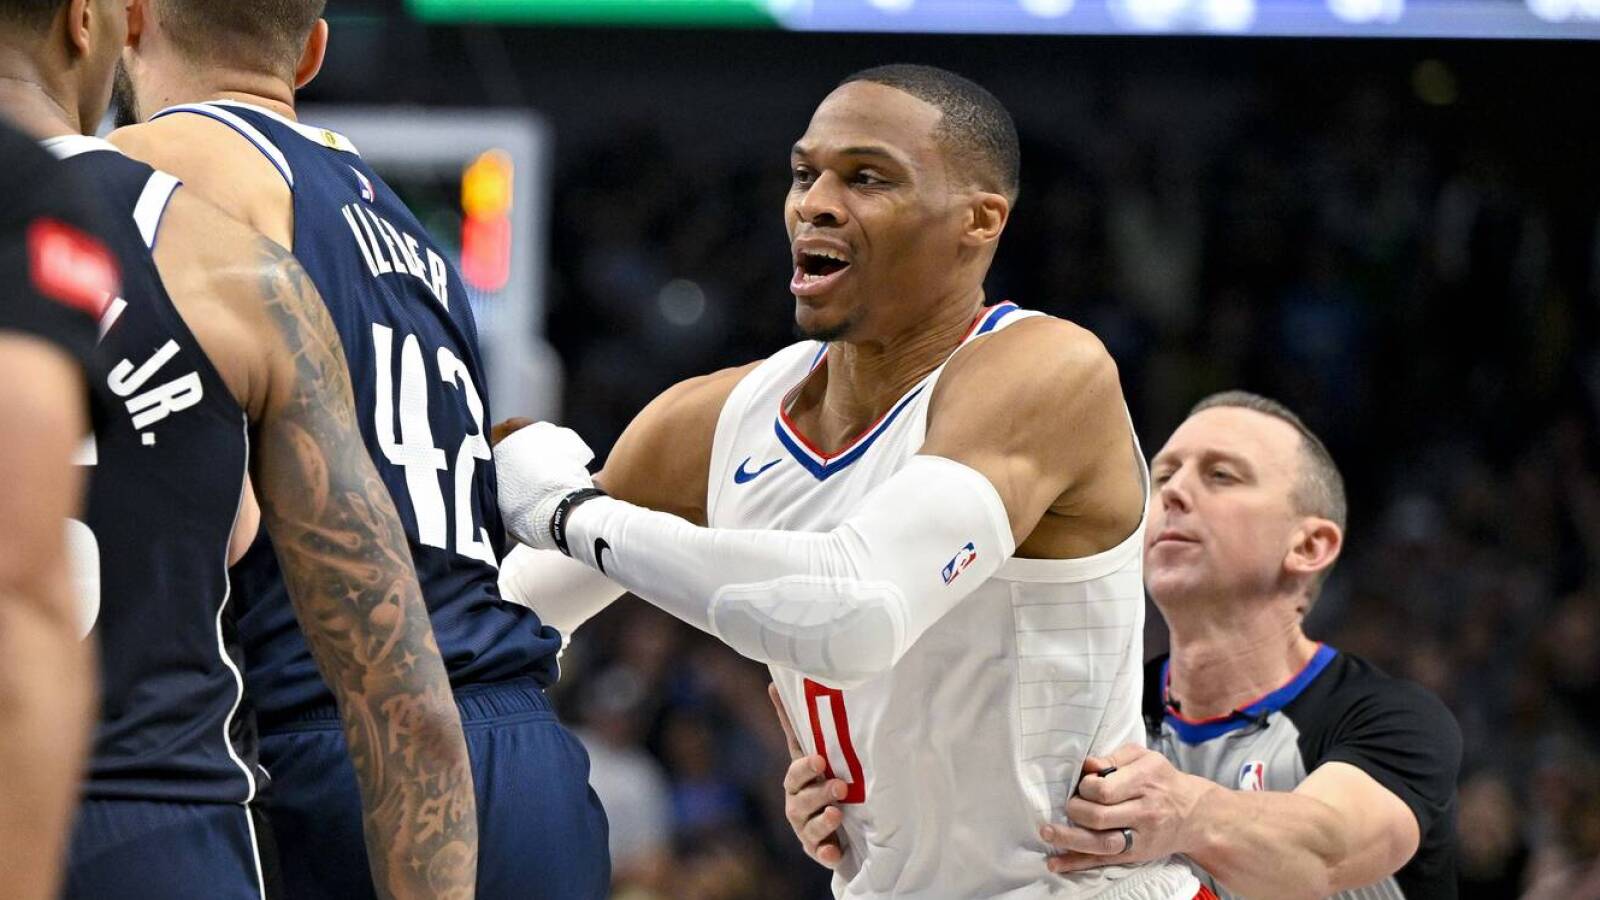 Stephen A. Smith blasts NBA for not suspending Russell Westbrook